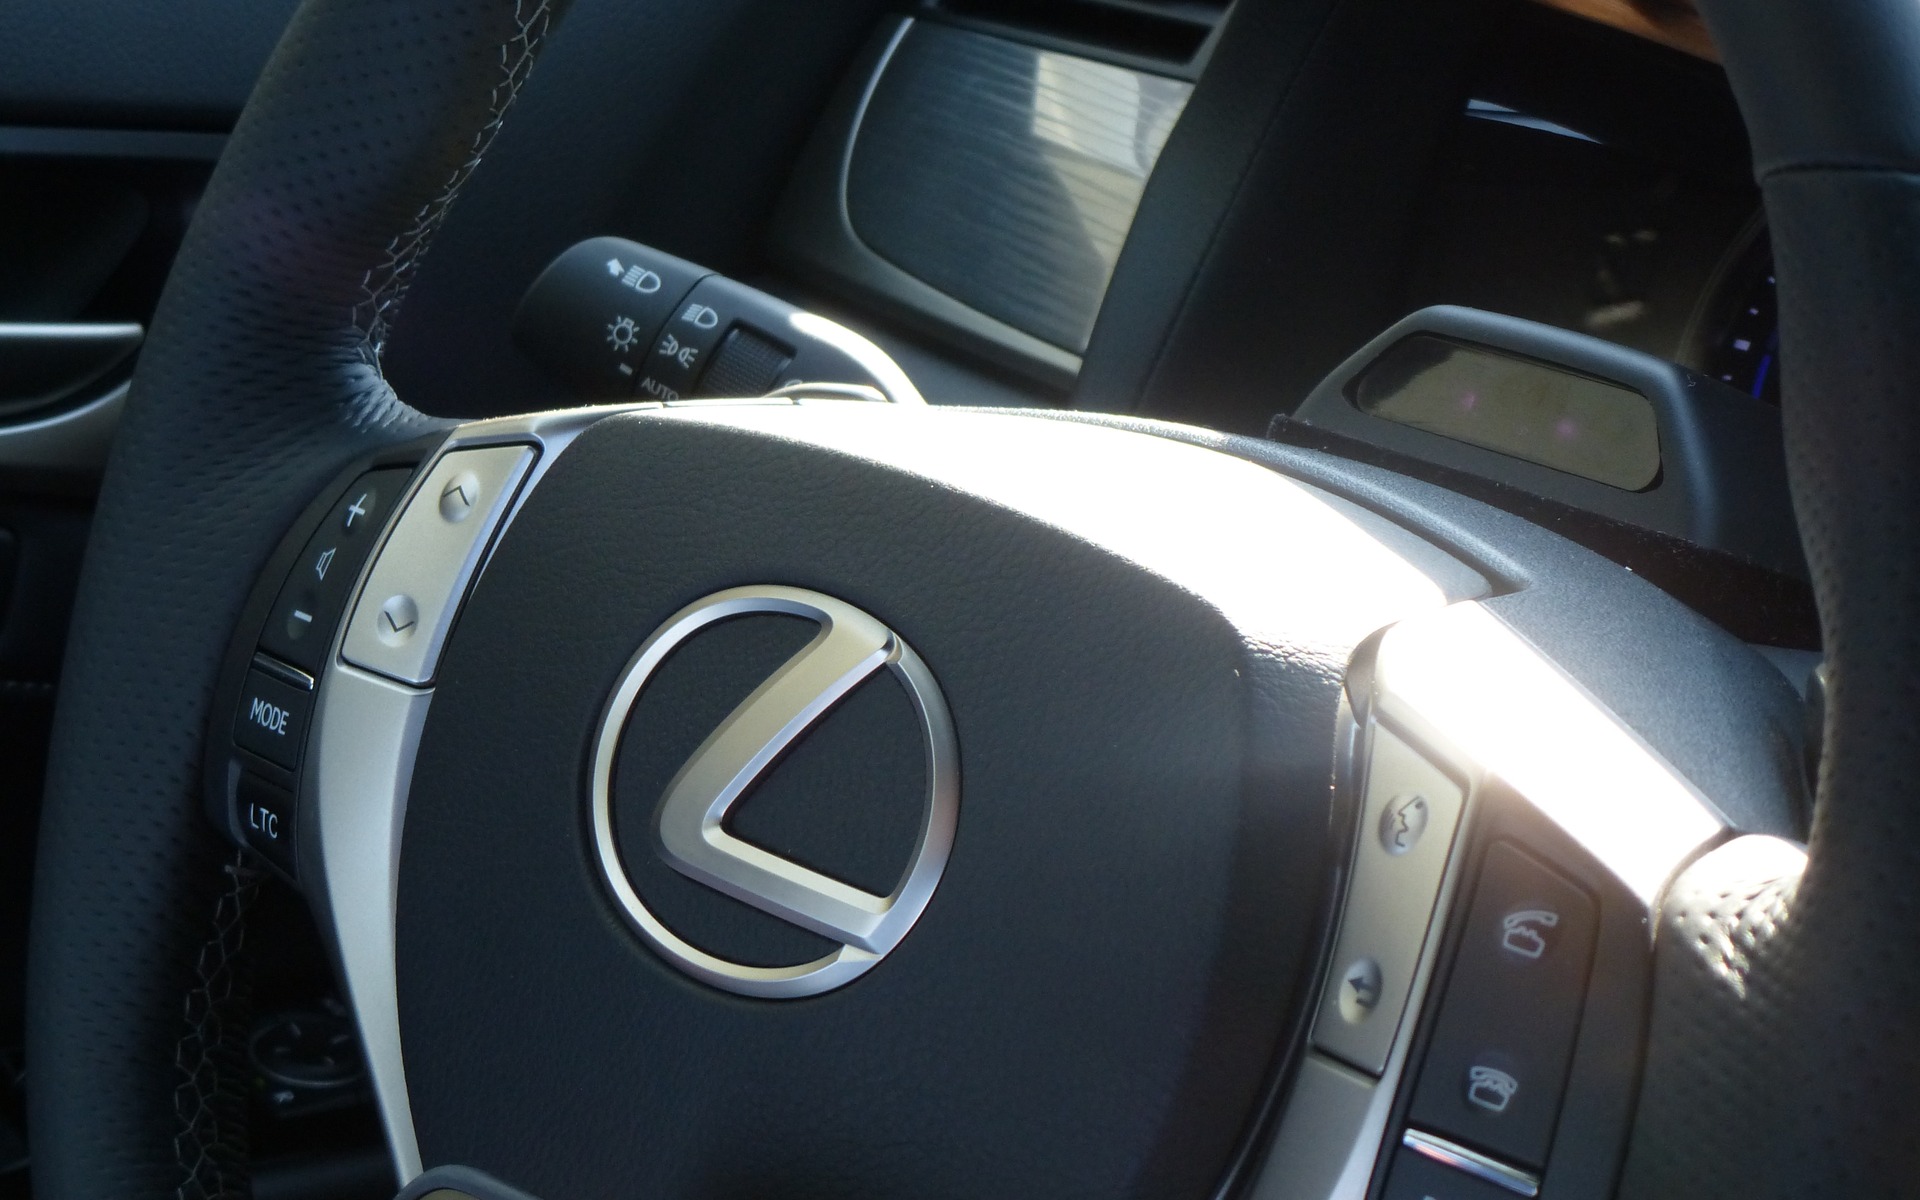 The facial recognition camera mounted on top of the steering column